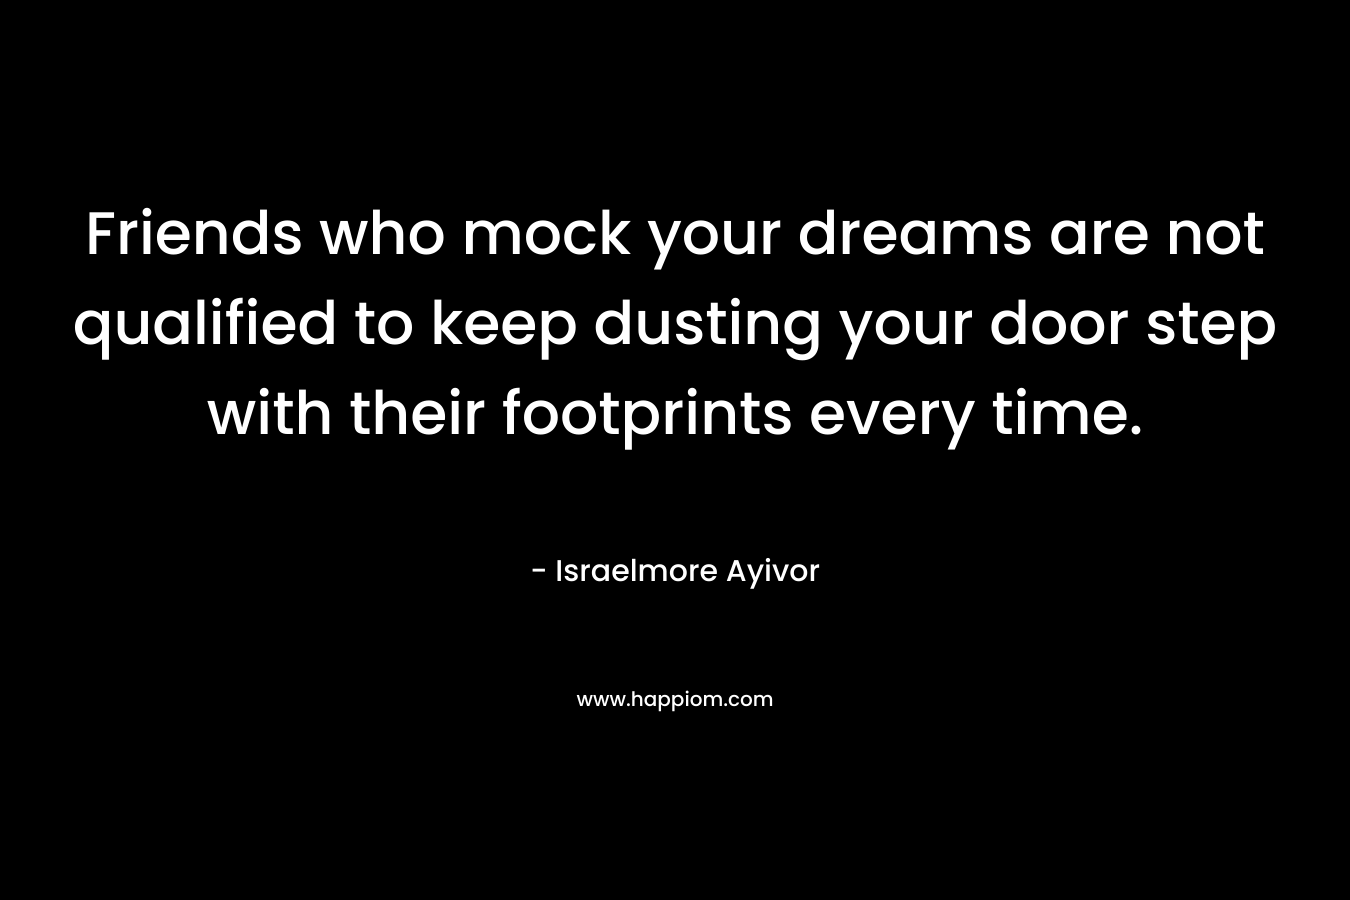 Friends who mock your dreams are not qualified to keep dusting your door step with their footprints every time. – Israelmore Ayivor